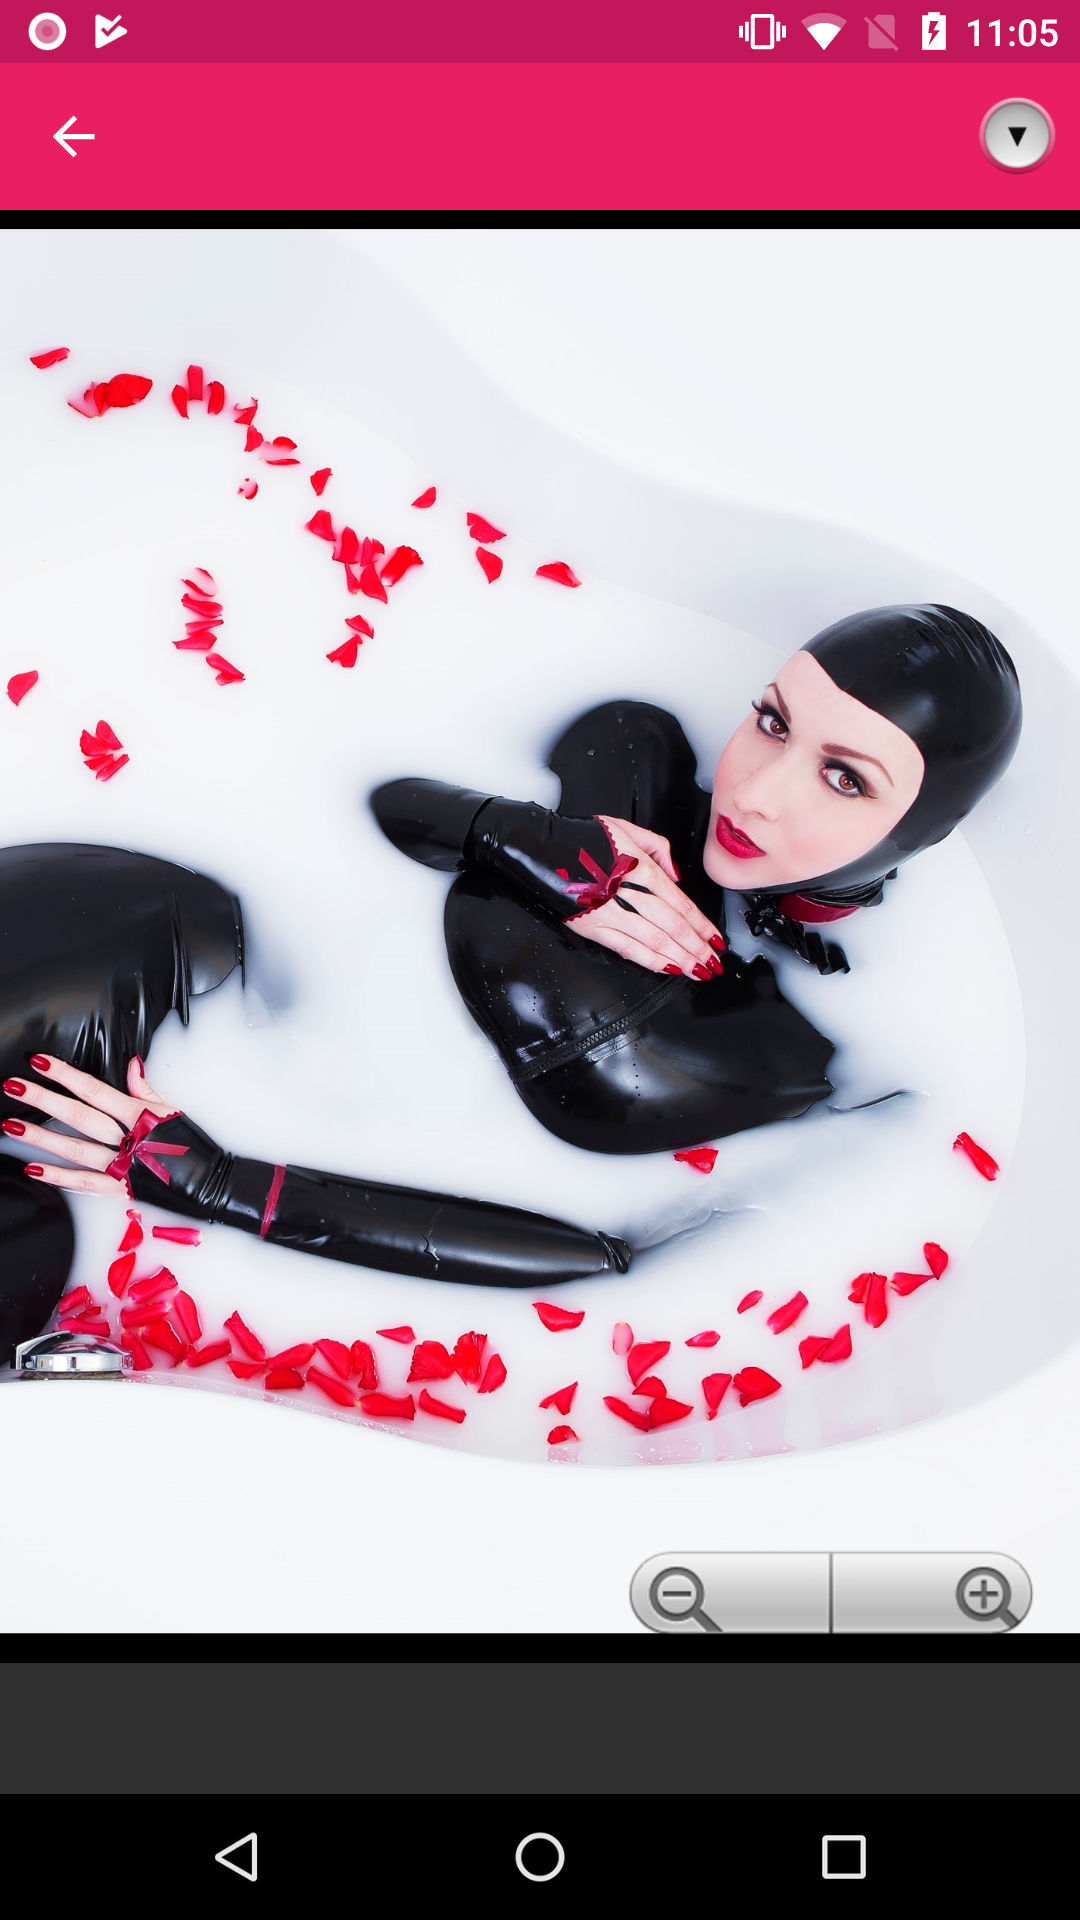 Mistress Wallpapers the,best,latex,packs,android,domination,wallpapers,porn,femdom,mistress,pictures,pics,adult,pornstarphoto,shemales,apk,sexy,ebony,hentai,apps,bdsm,app,images,download